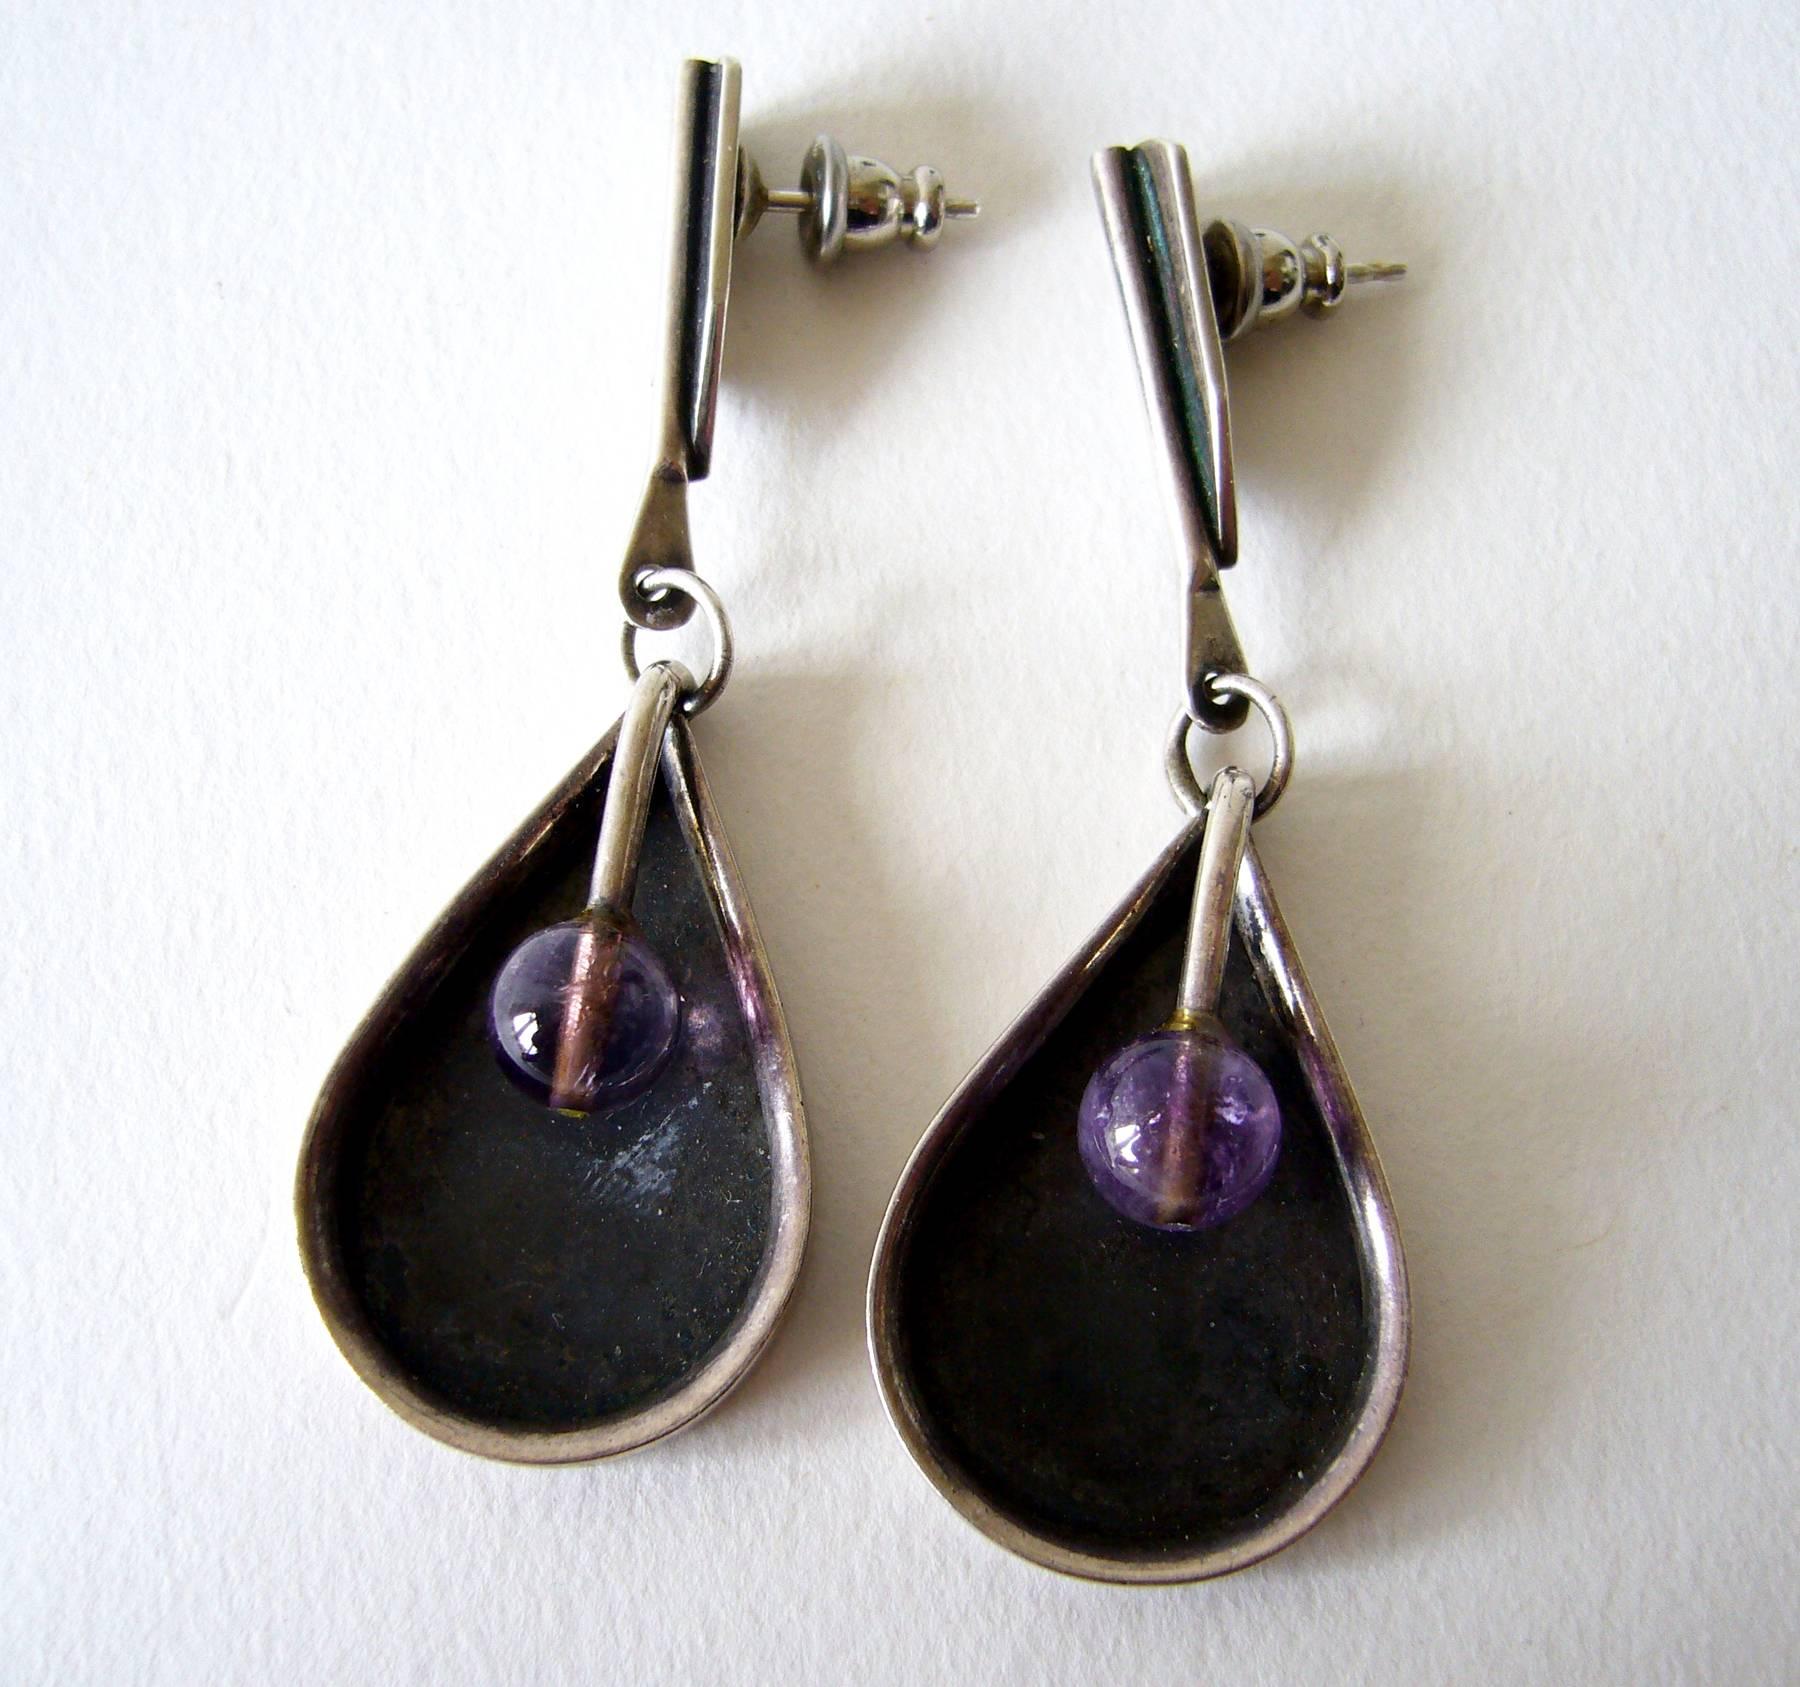 Amethyst and sterling silver pierced earrings designed by Jules Brenner of New York City, New York.  Earrings measure 2.25" in length and are signed Jules Brenner, Sterling.  In very good vintage condition.  